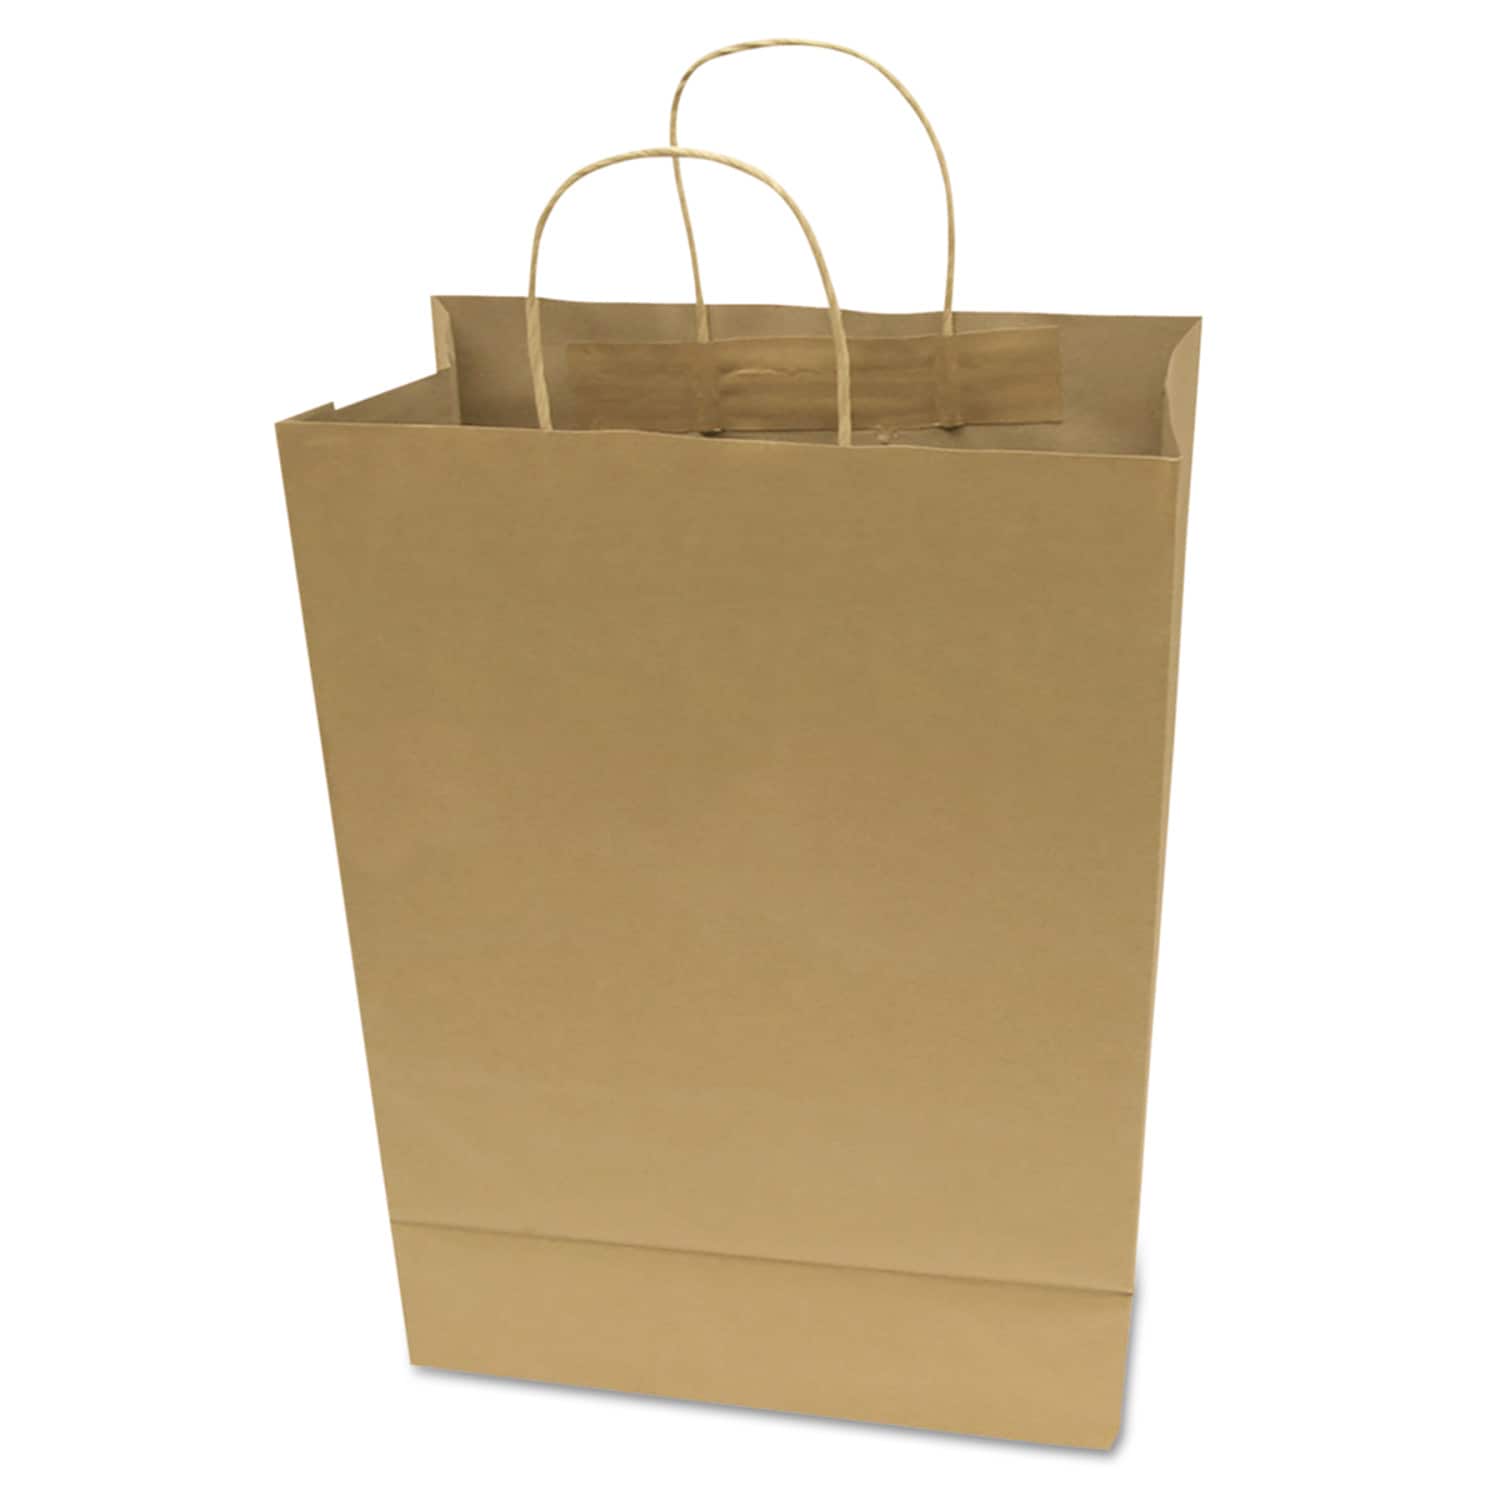 Clear Polypropylene Bags 6 inch x 6 inch - 2 Mil Thick | Quantity: 1000 by Paper Mart